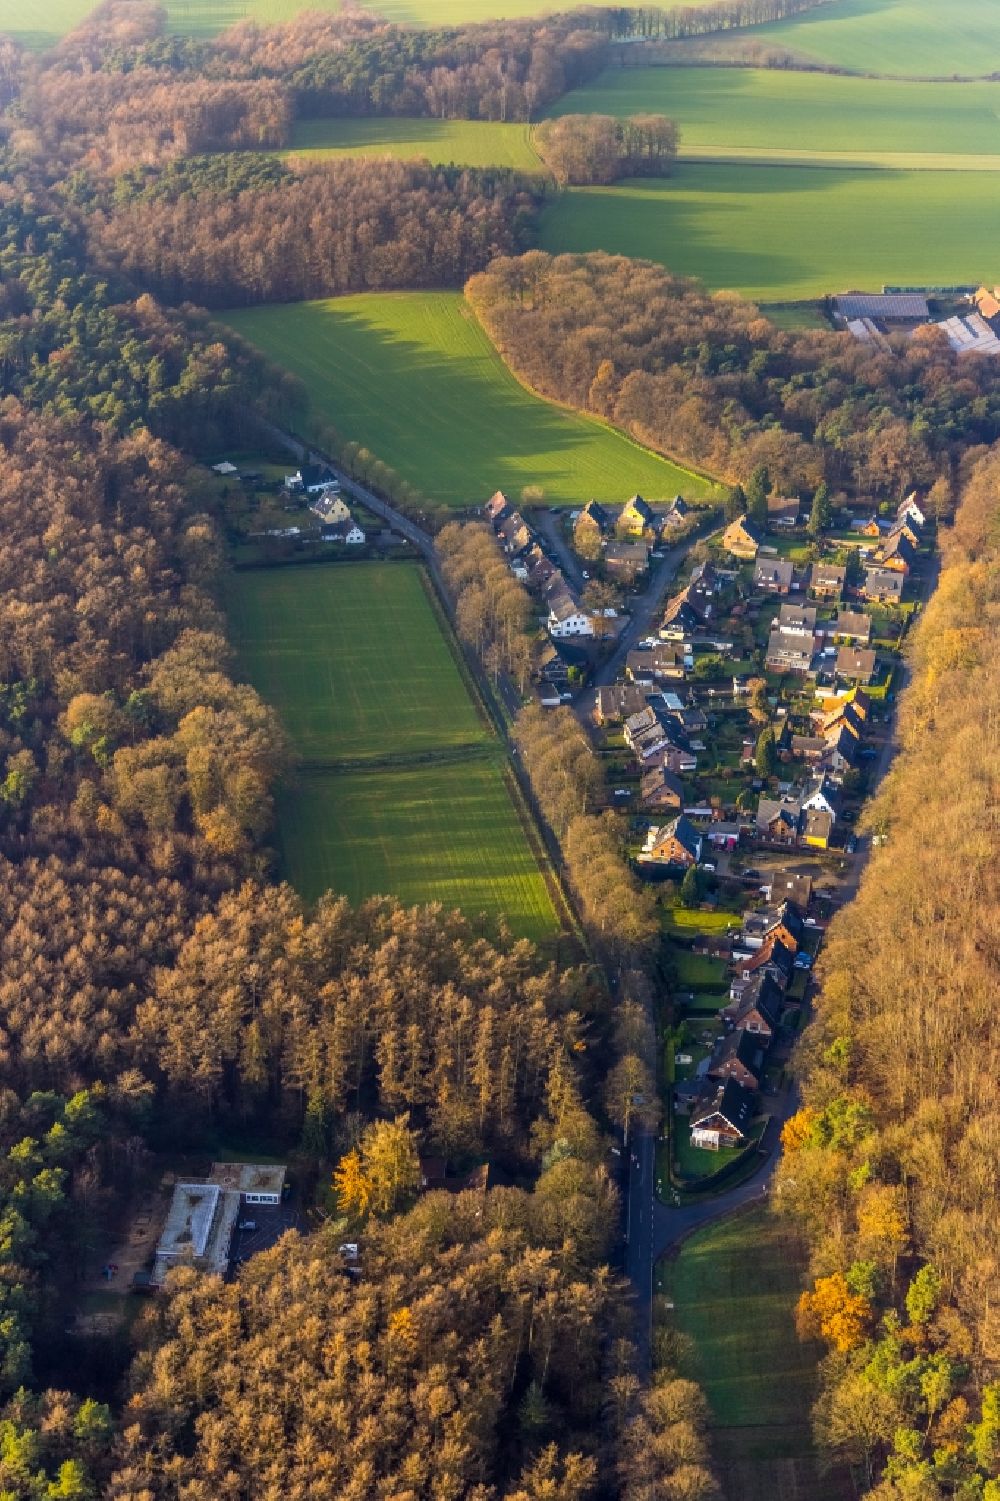 Haltern am See from above - Aerial view of a forest settlement Holtwicker Strasse in the district Holtwick in Haltern am See in the Ruhr area in North Rhine-Westphalia, Germany